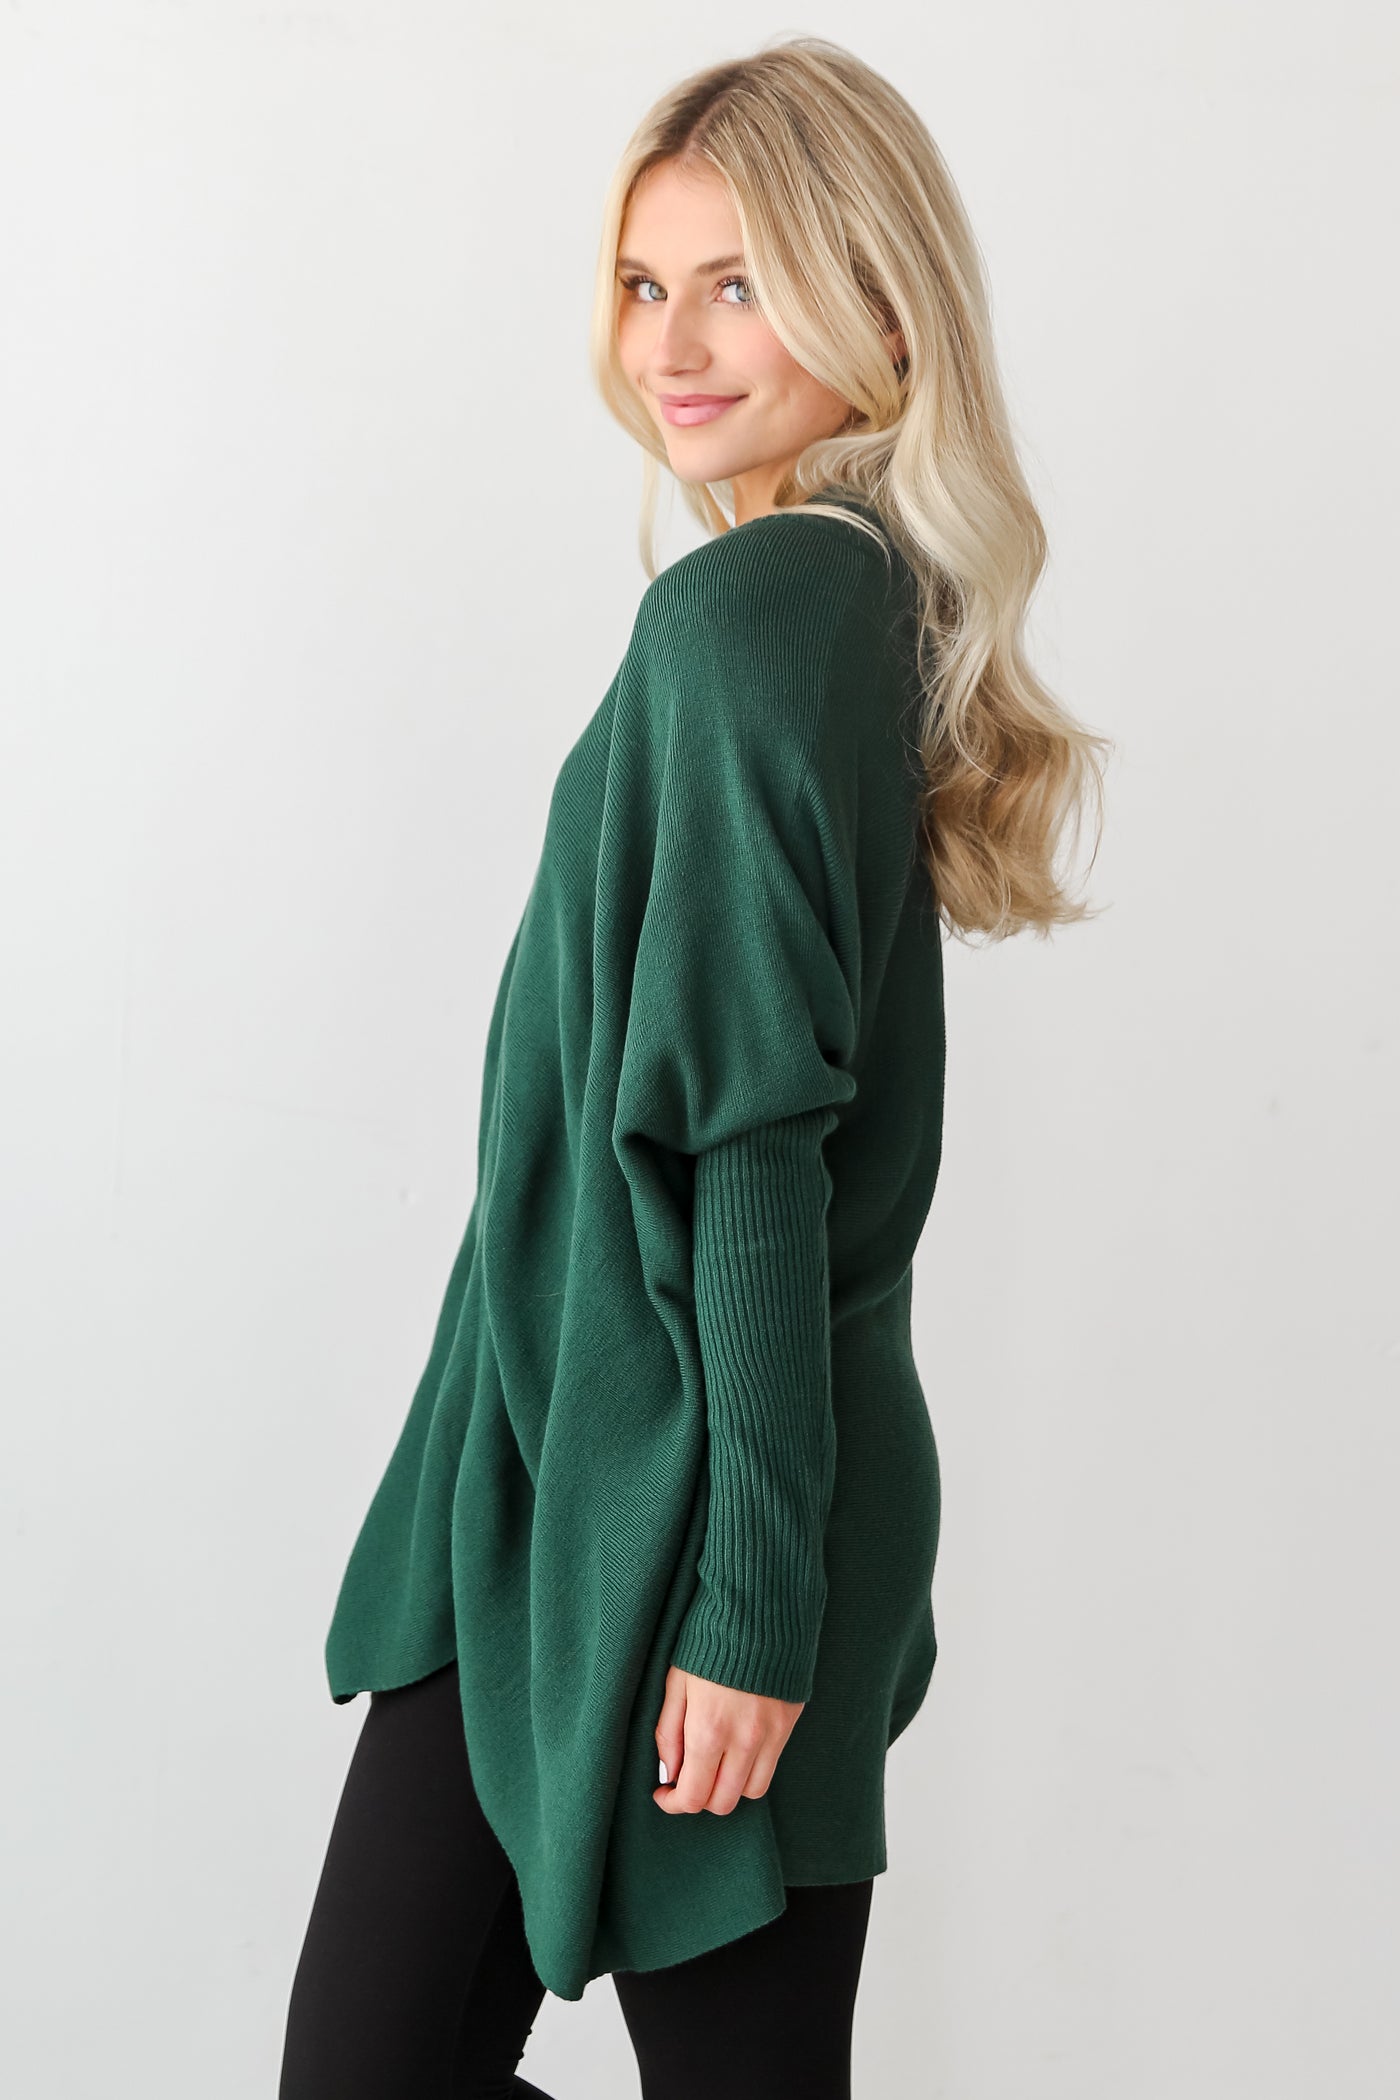 Green Oversized Sweater side view